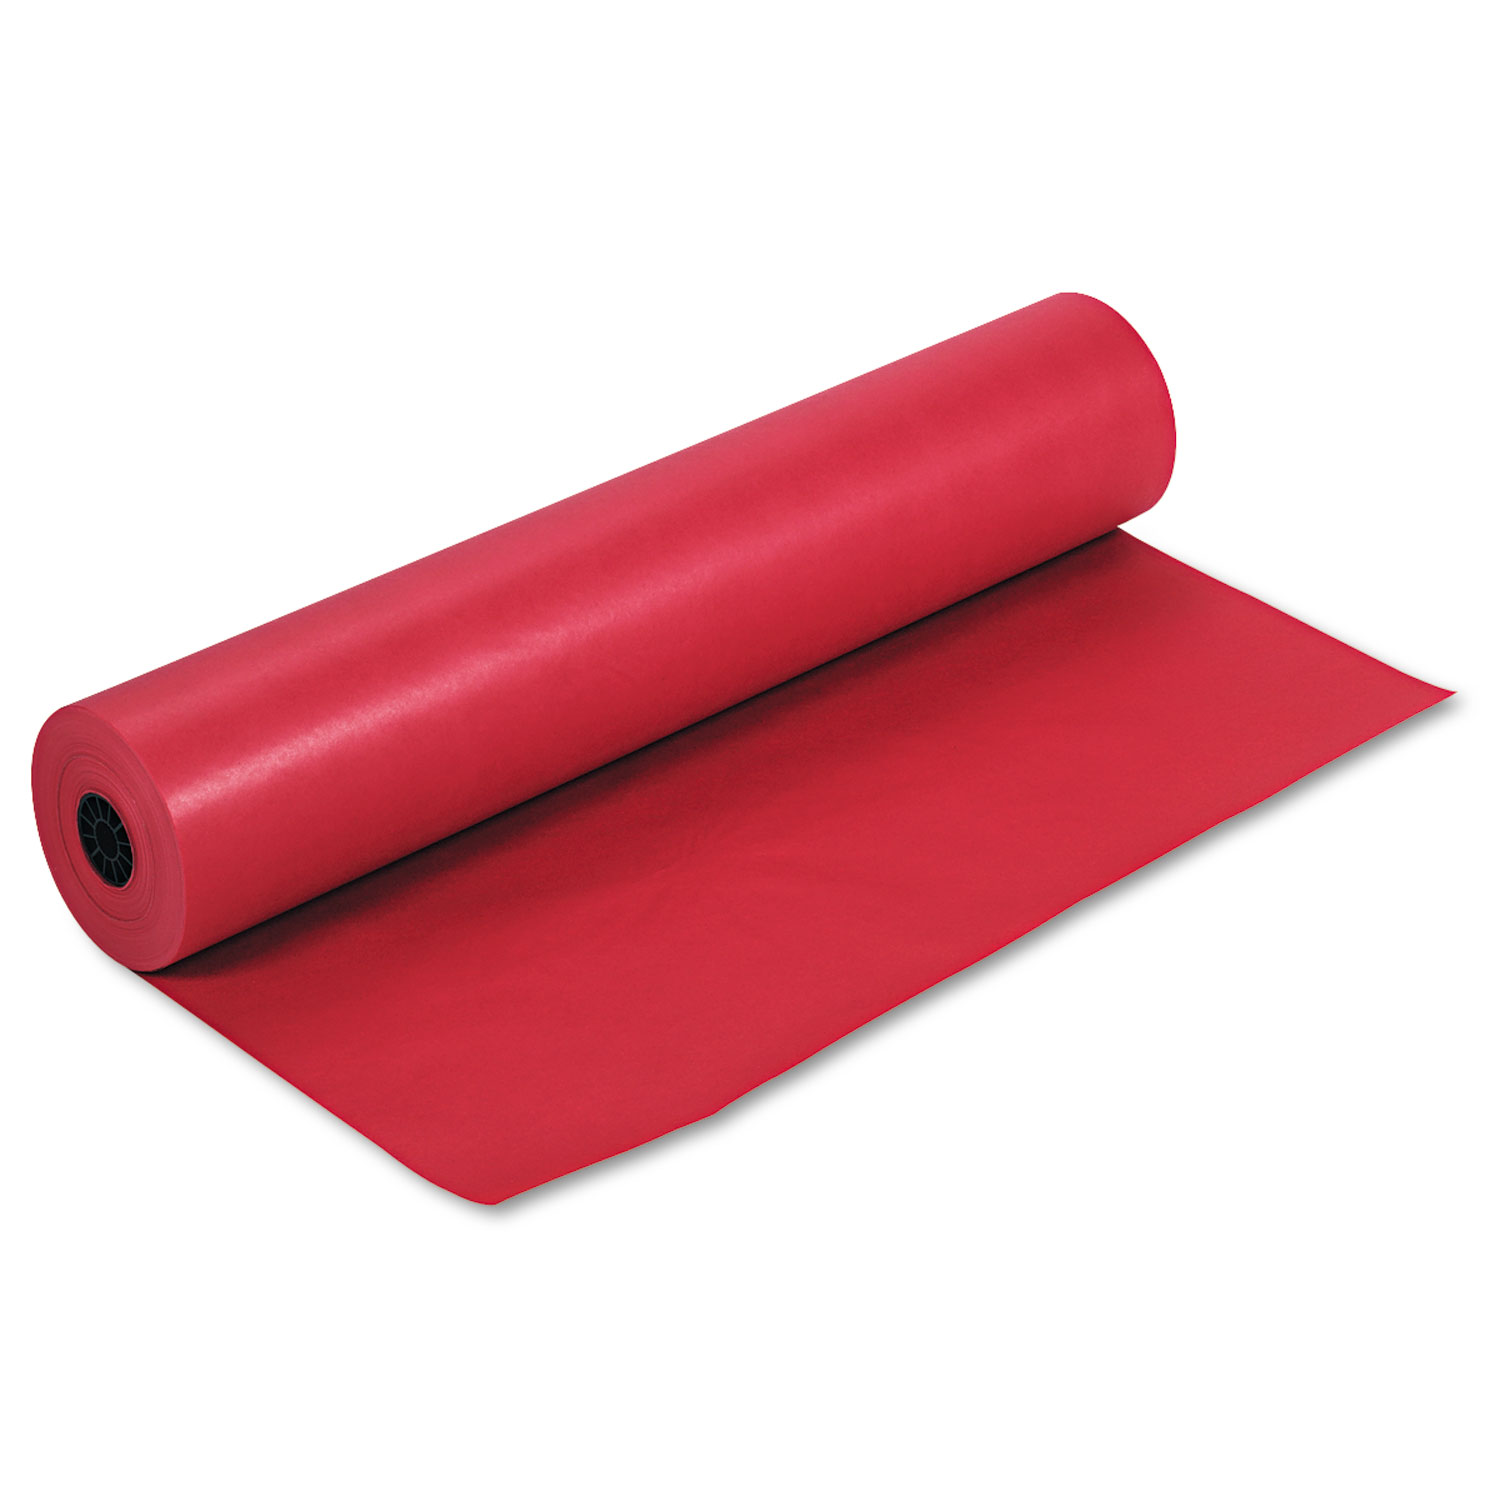 Rainbow Duo-Finish Colored Kraft Paper, 35 lbs., 36 x 1000 ft, Scarlet